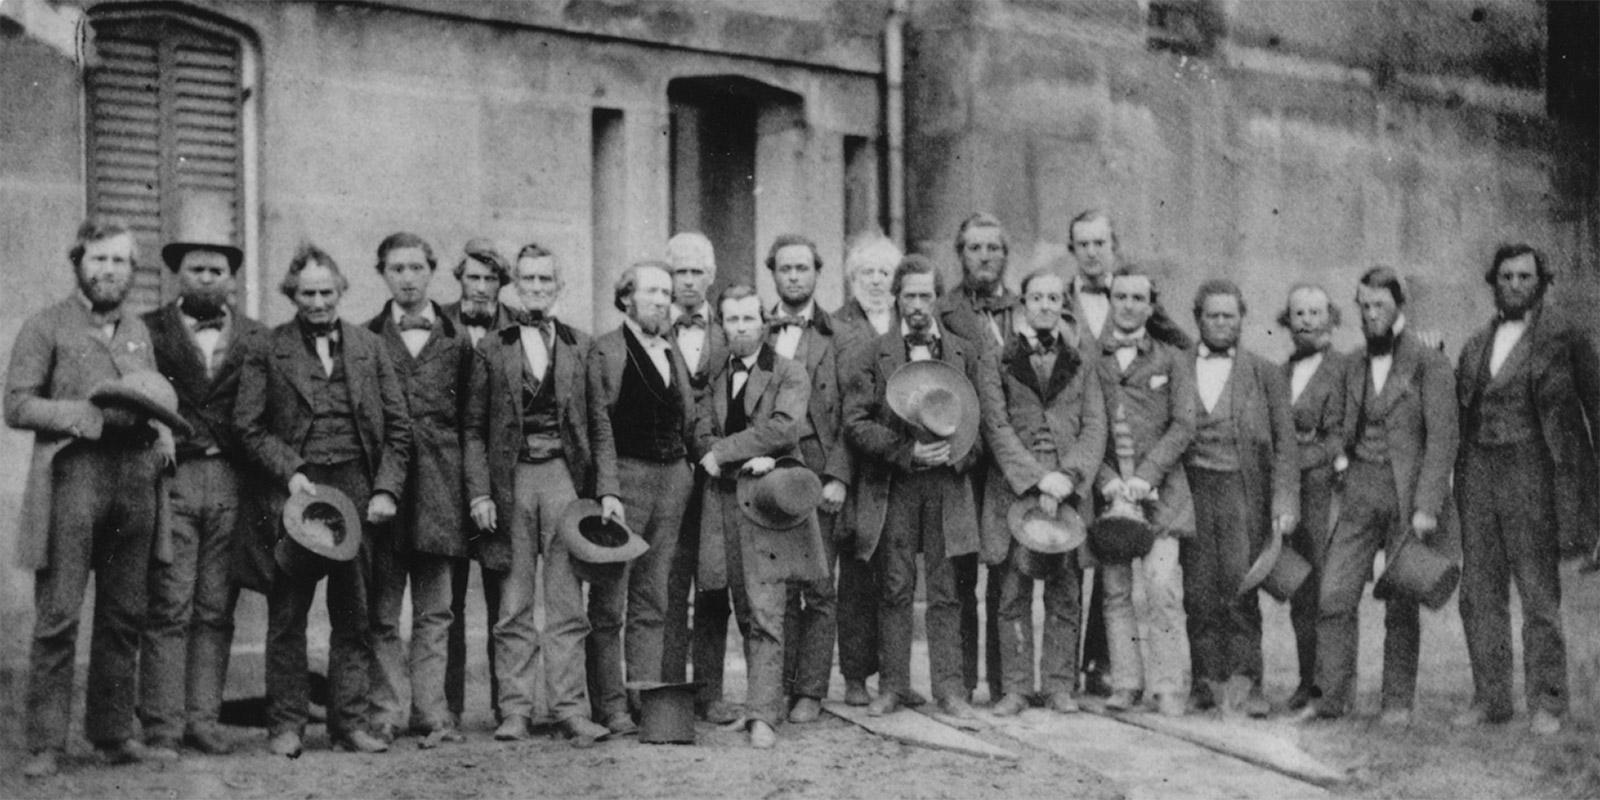 Historical photo of 20 men standing together, holding their hats.